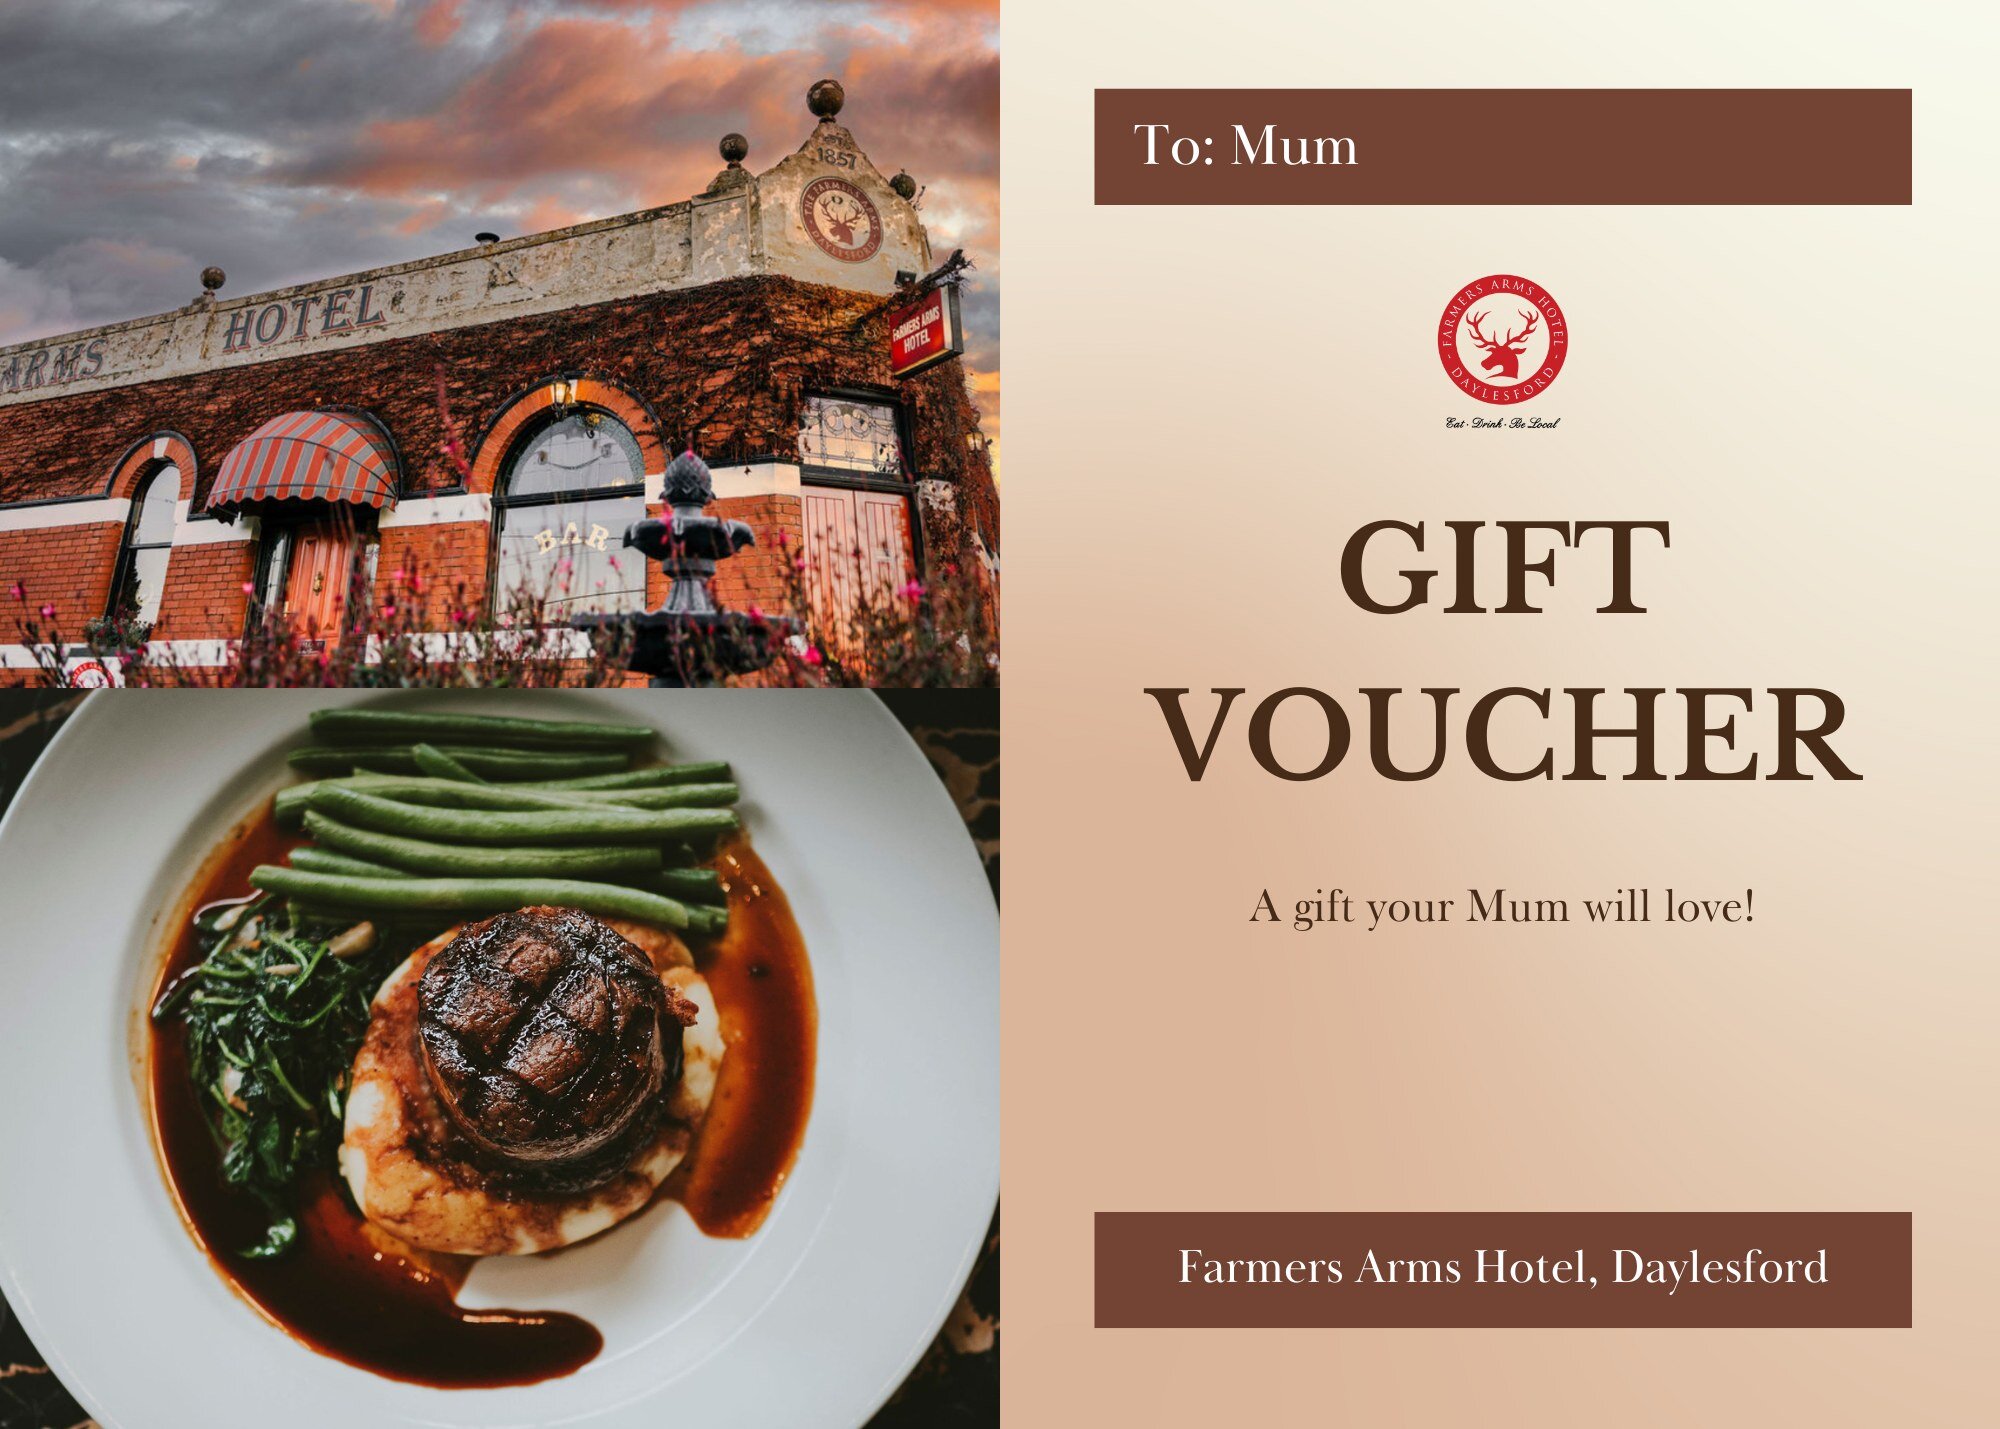 Spoil your Mum this Mother&rsquo;s Day with a Farmers Arms Hotel gift card! 💌🥰

Delicious food, wine and a great atmosphere&hellip; this is a gift your special one will LOVE! 

Simply click the link in our bio to purchase your gift card and it will